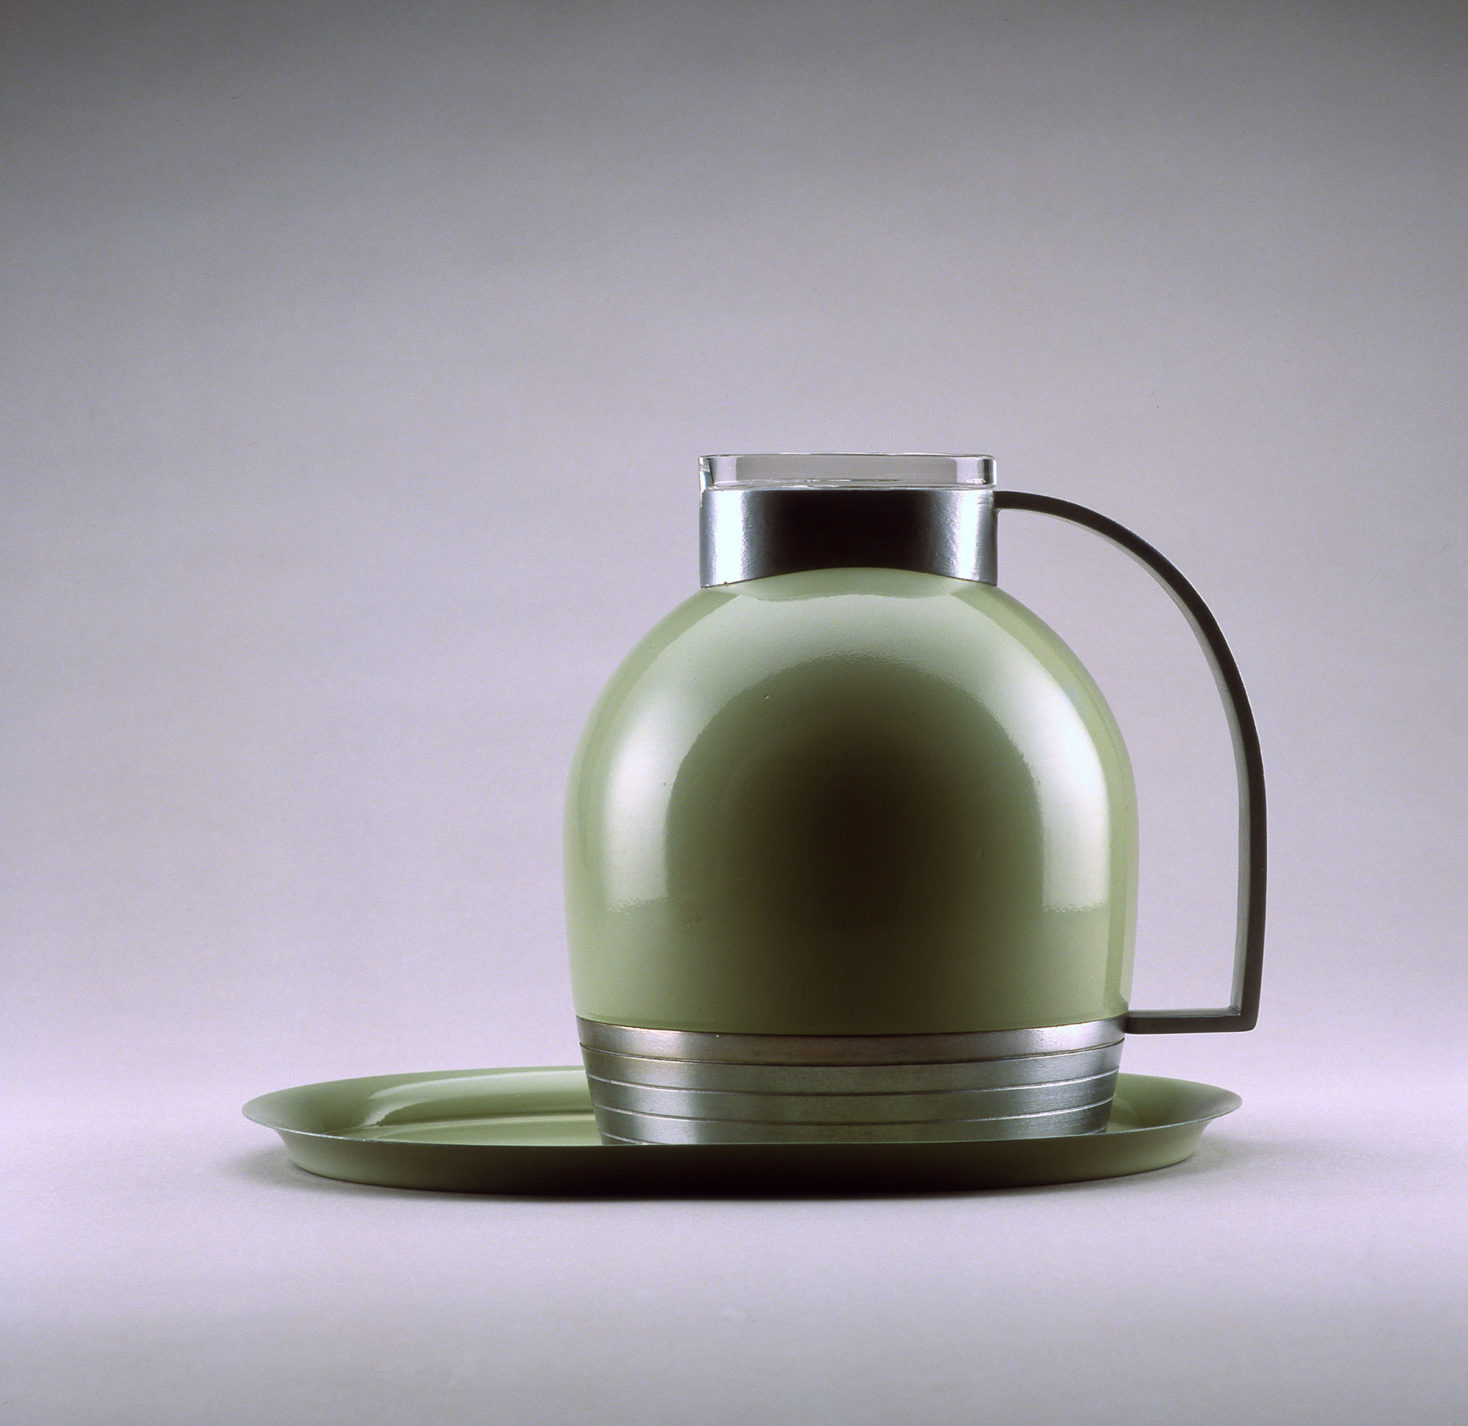 Dome-shaped thermal pitcher in green enameled metal with an aluminum base, top, and handle, and a lid of clear glass. It sits on an oval tray in matching green.